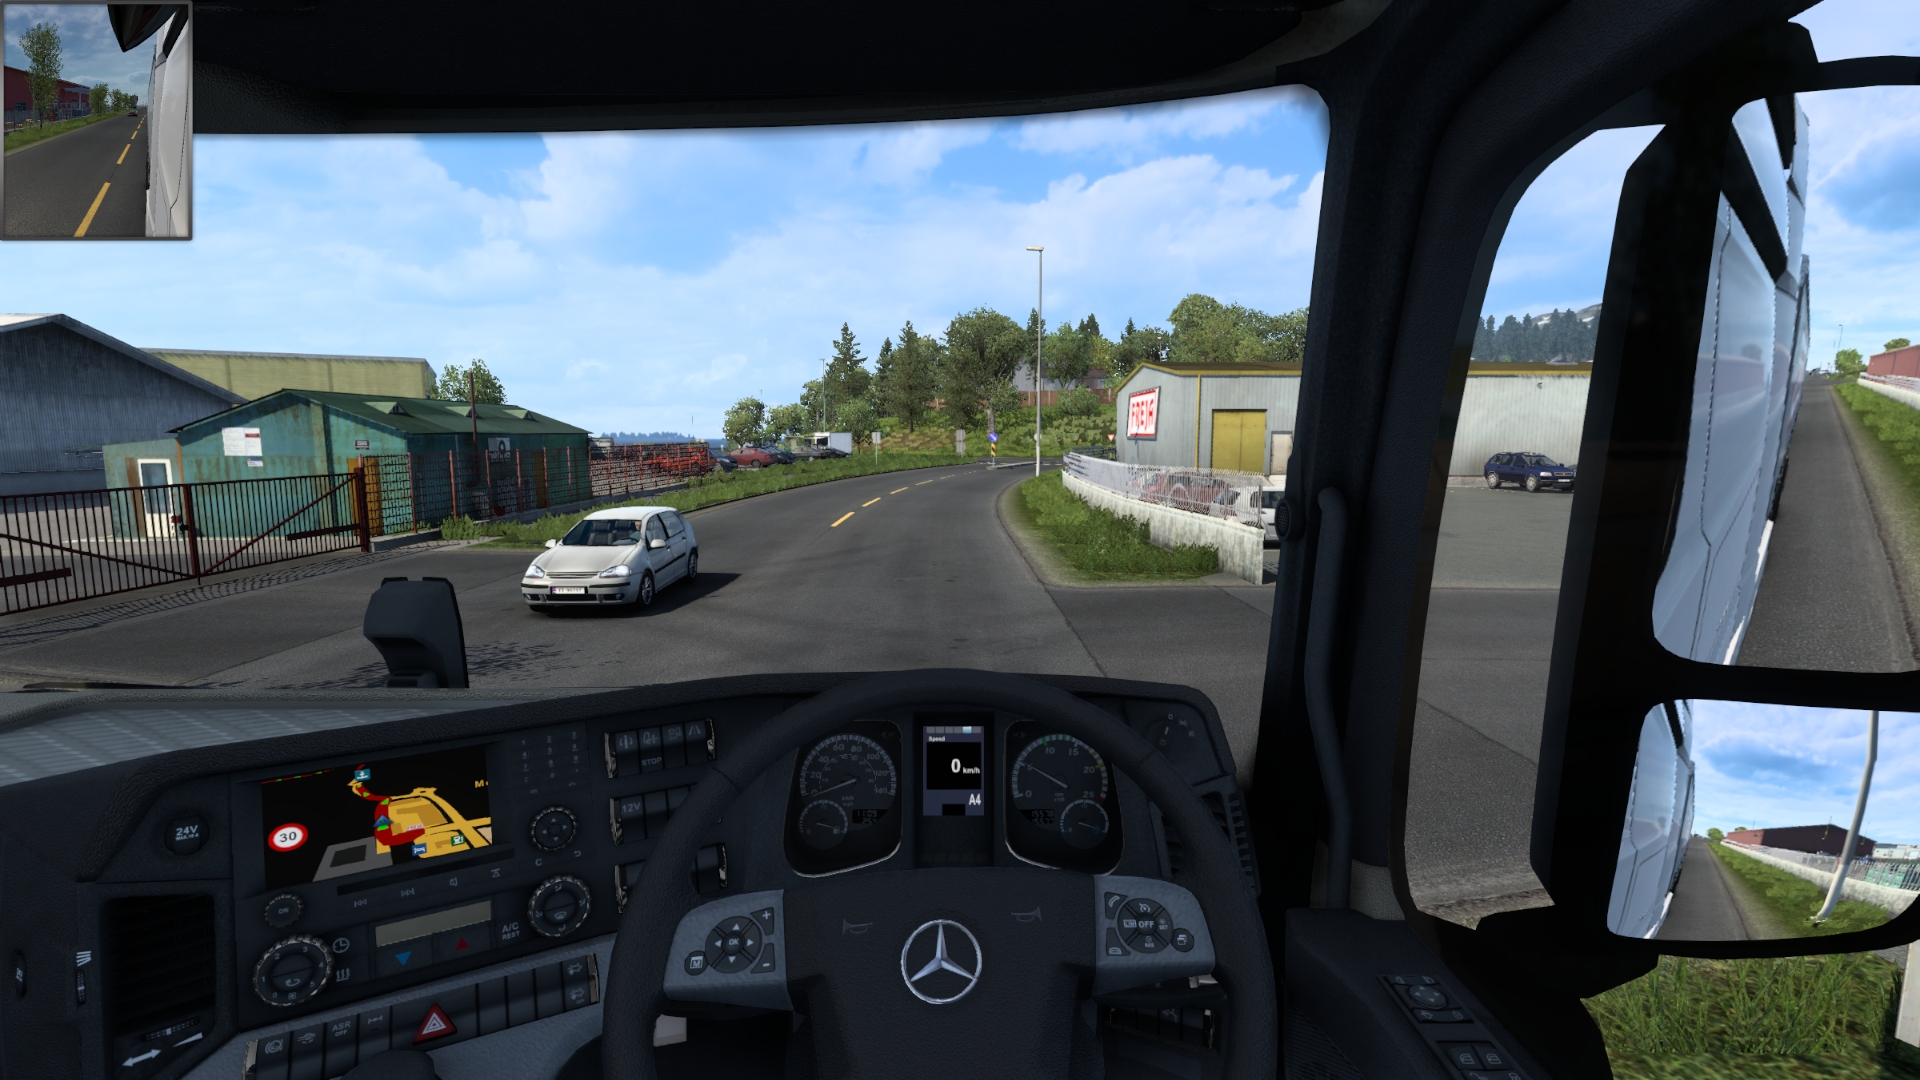 Image 001 - How to Cancel the Current Job on Euro Truck Simulator 2 5